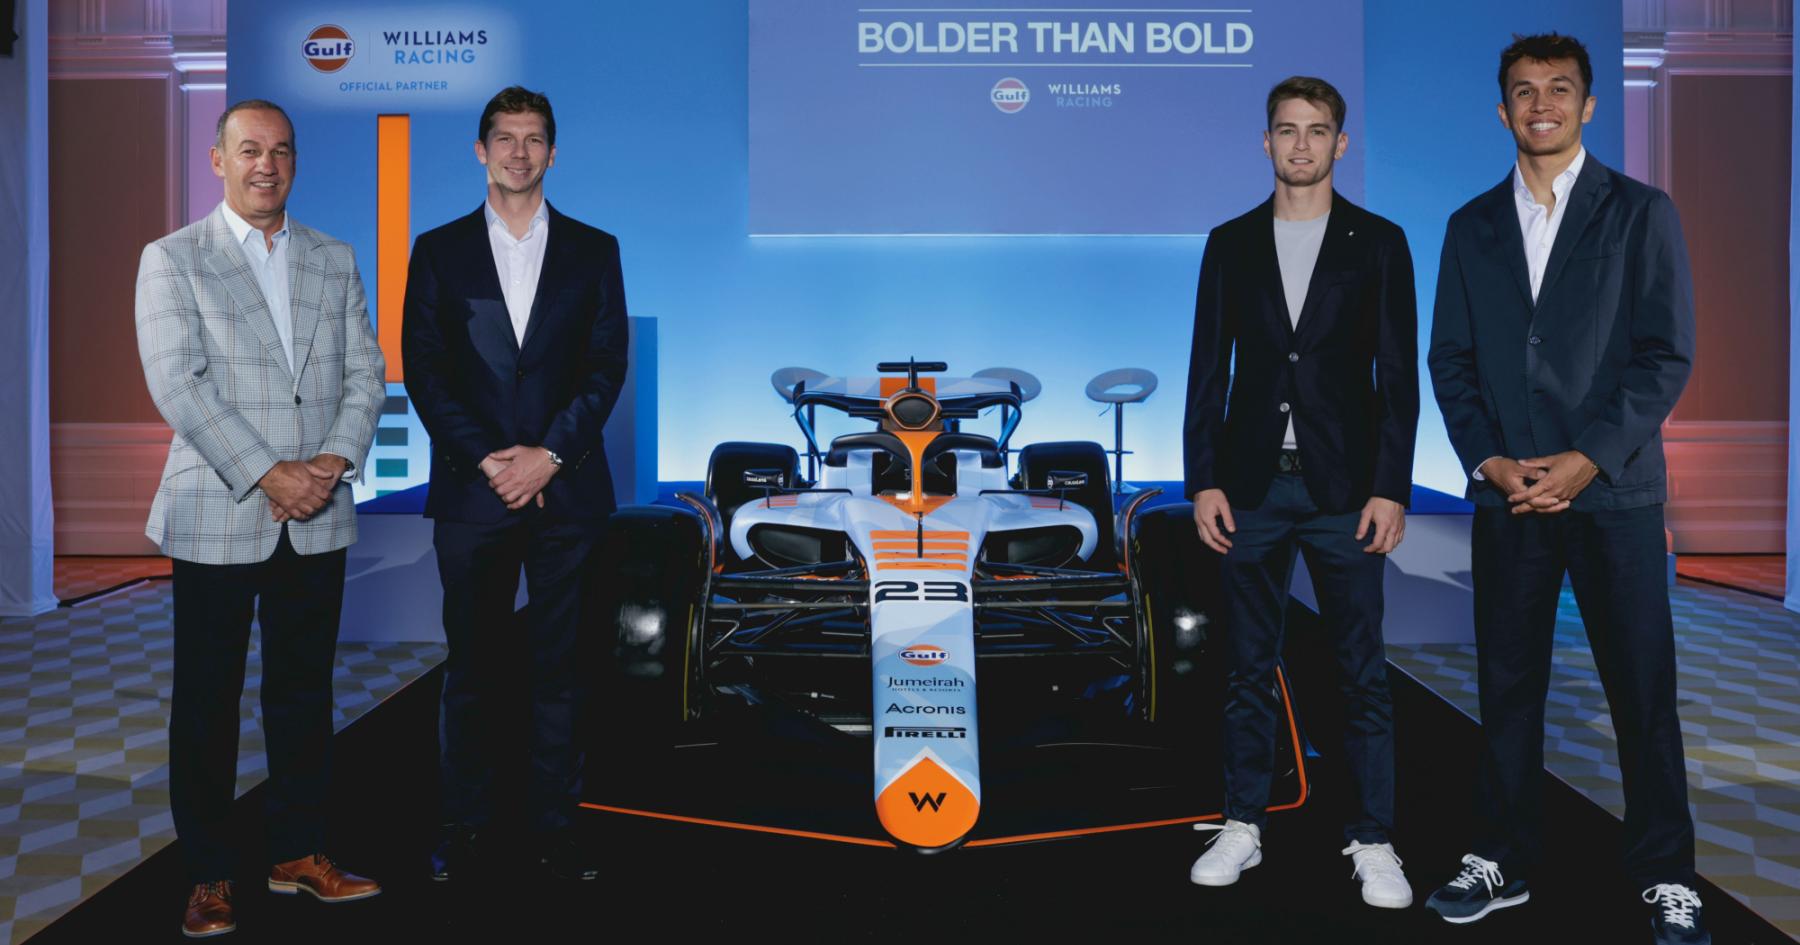 Winner of the Gulf livery vote revealed by Williams